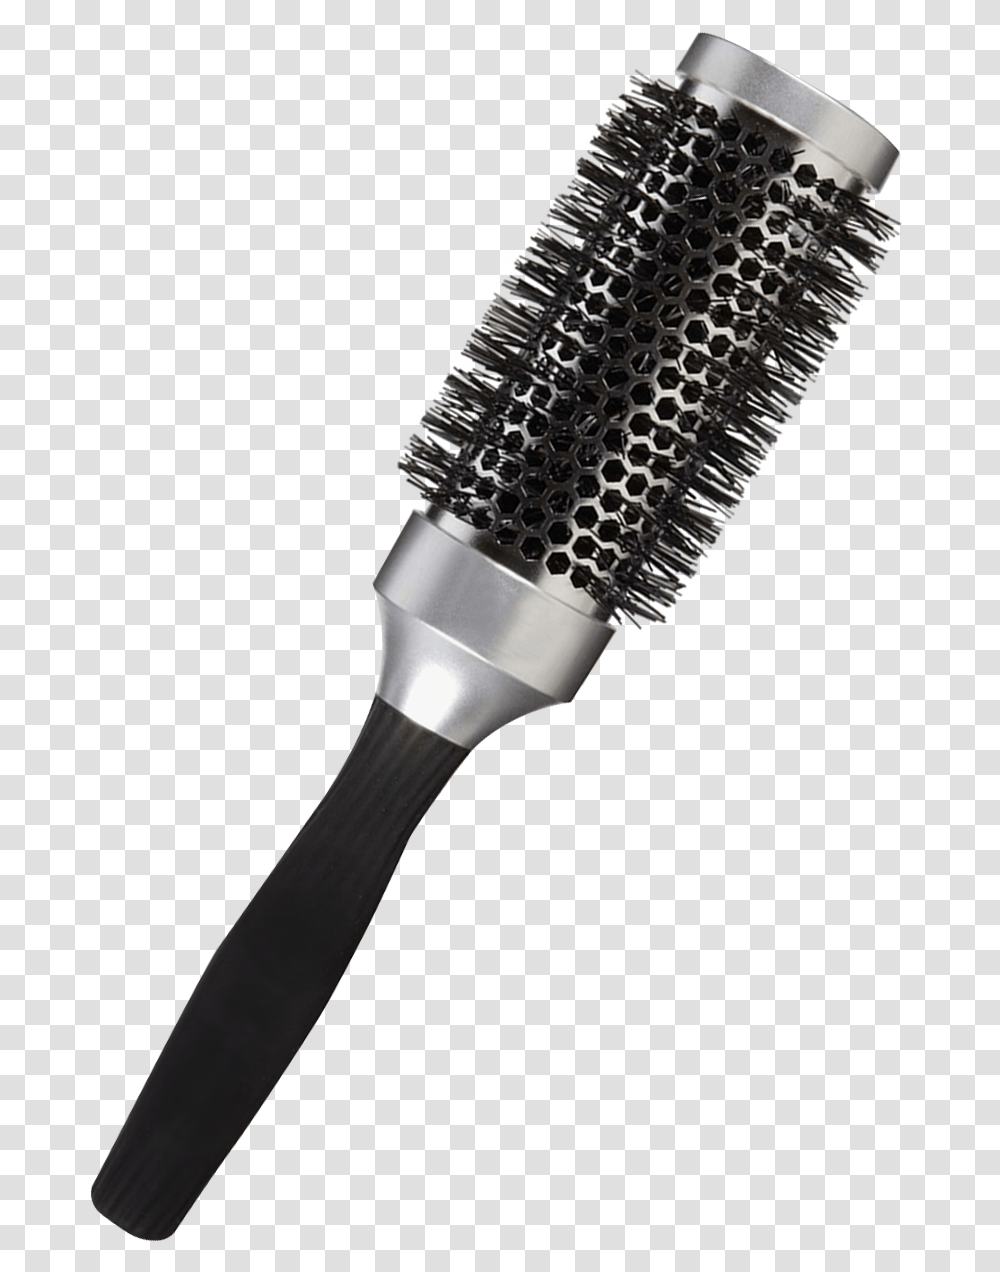 Combing Hair Clipart Brush And Comb, Electrical Device, Microphone, Sword, Blade Transparent Png